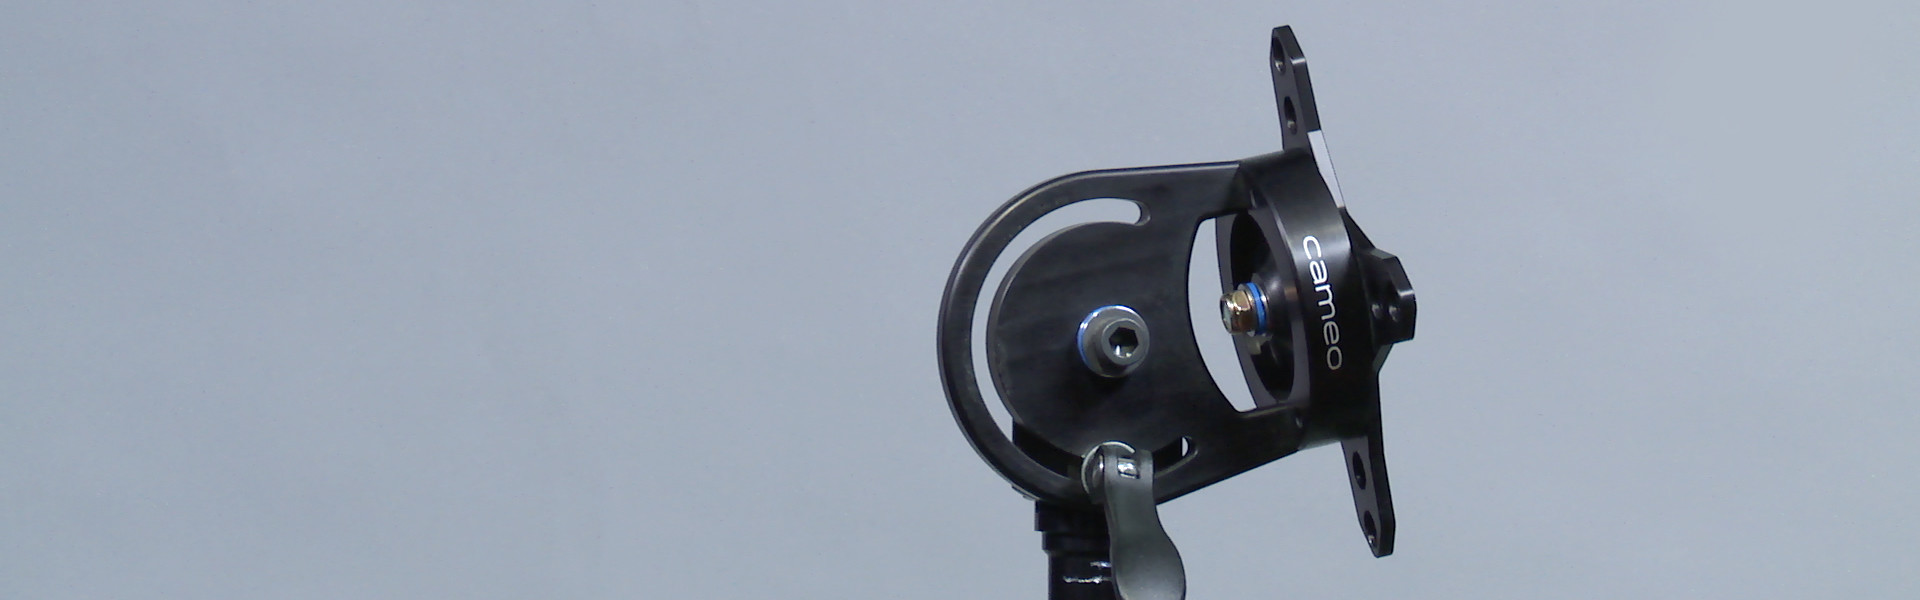 Header image for article At the Bench: Cameo VESA Mount & Accessories